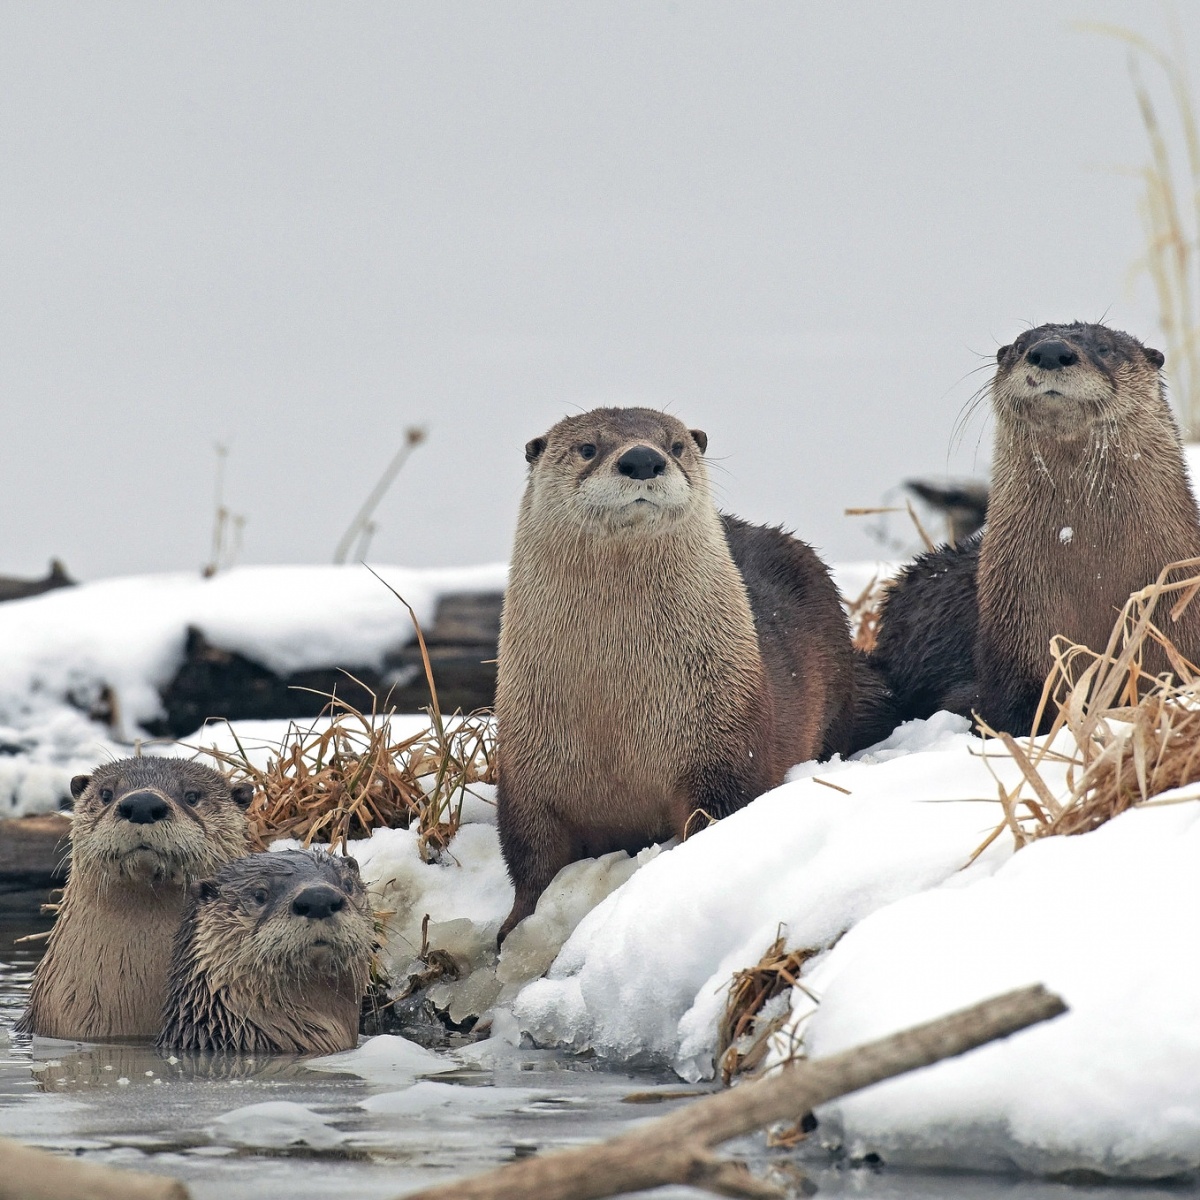 Four furry, gray otters stand on the snowy bank of an icy river.